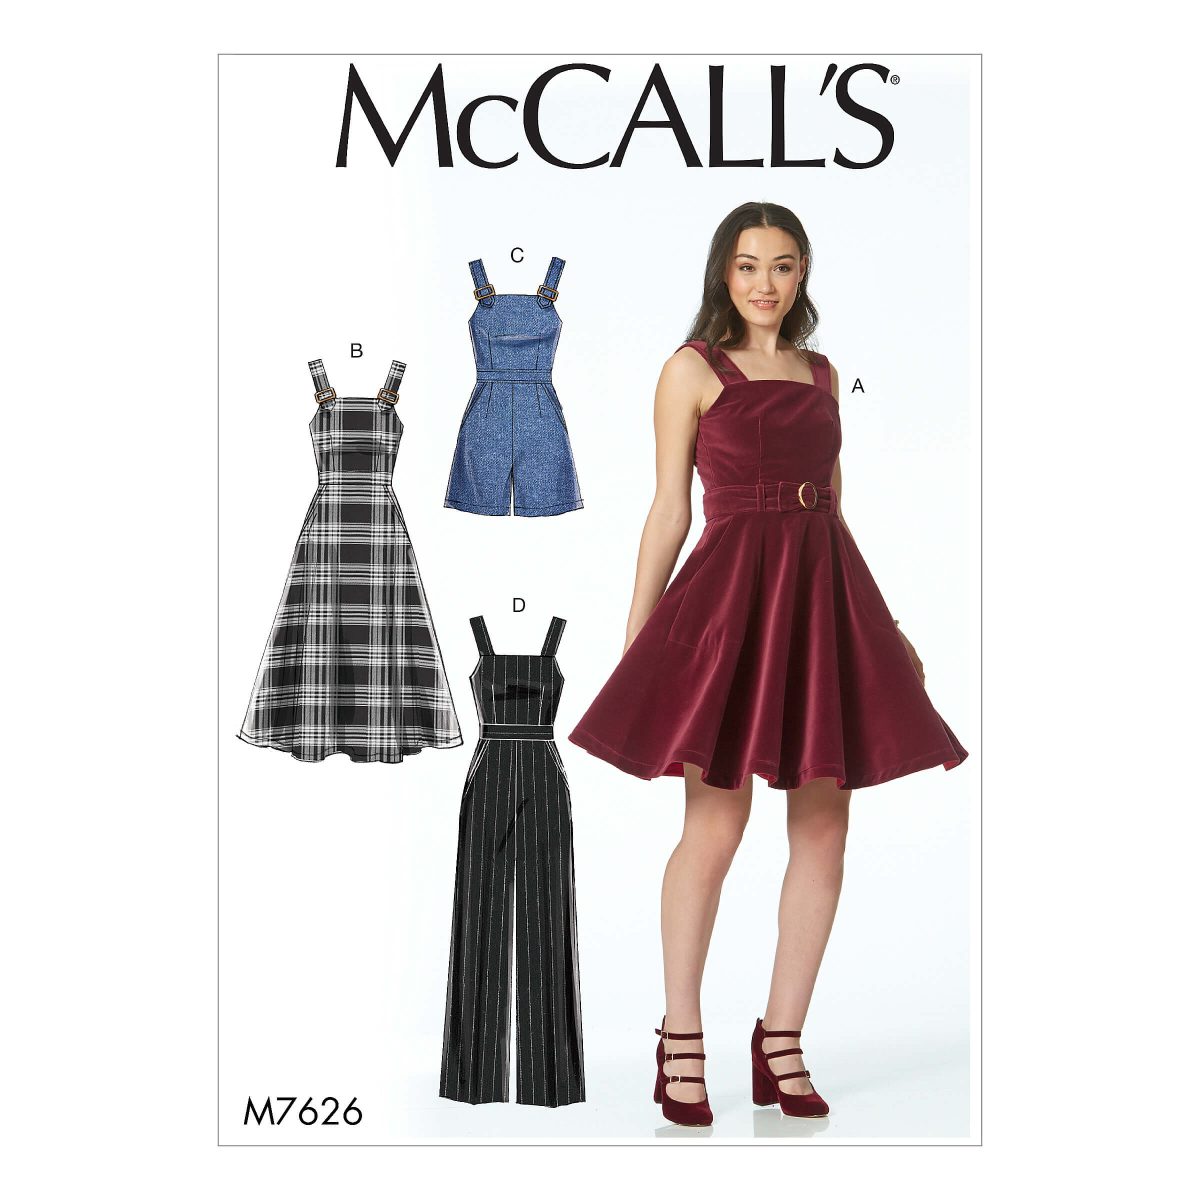 McCall's Sewing Pattern M7626 Misses' Dresses, Belt, Romper, and Jumpsuit with Pockets